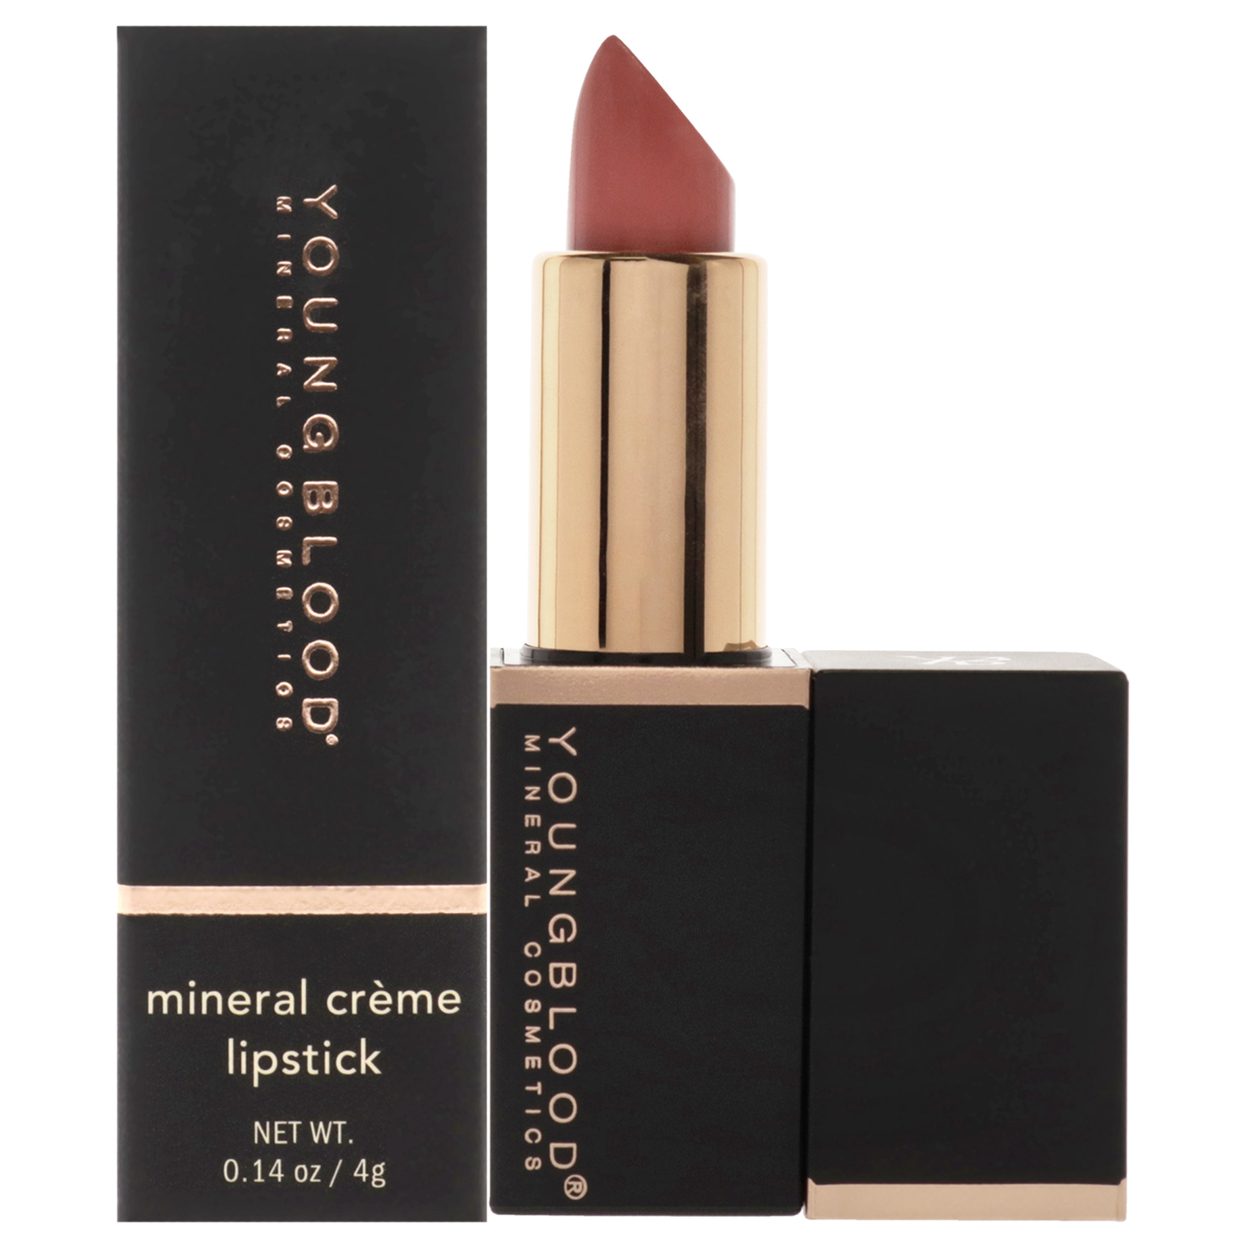 Youngblood Women COSMETIC Mineral Creme Lipstick - Coral Beach 0.14 Oz